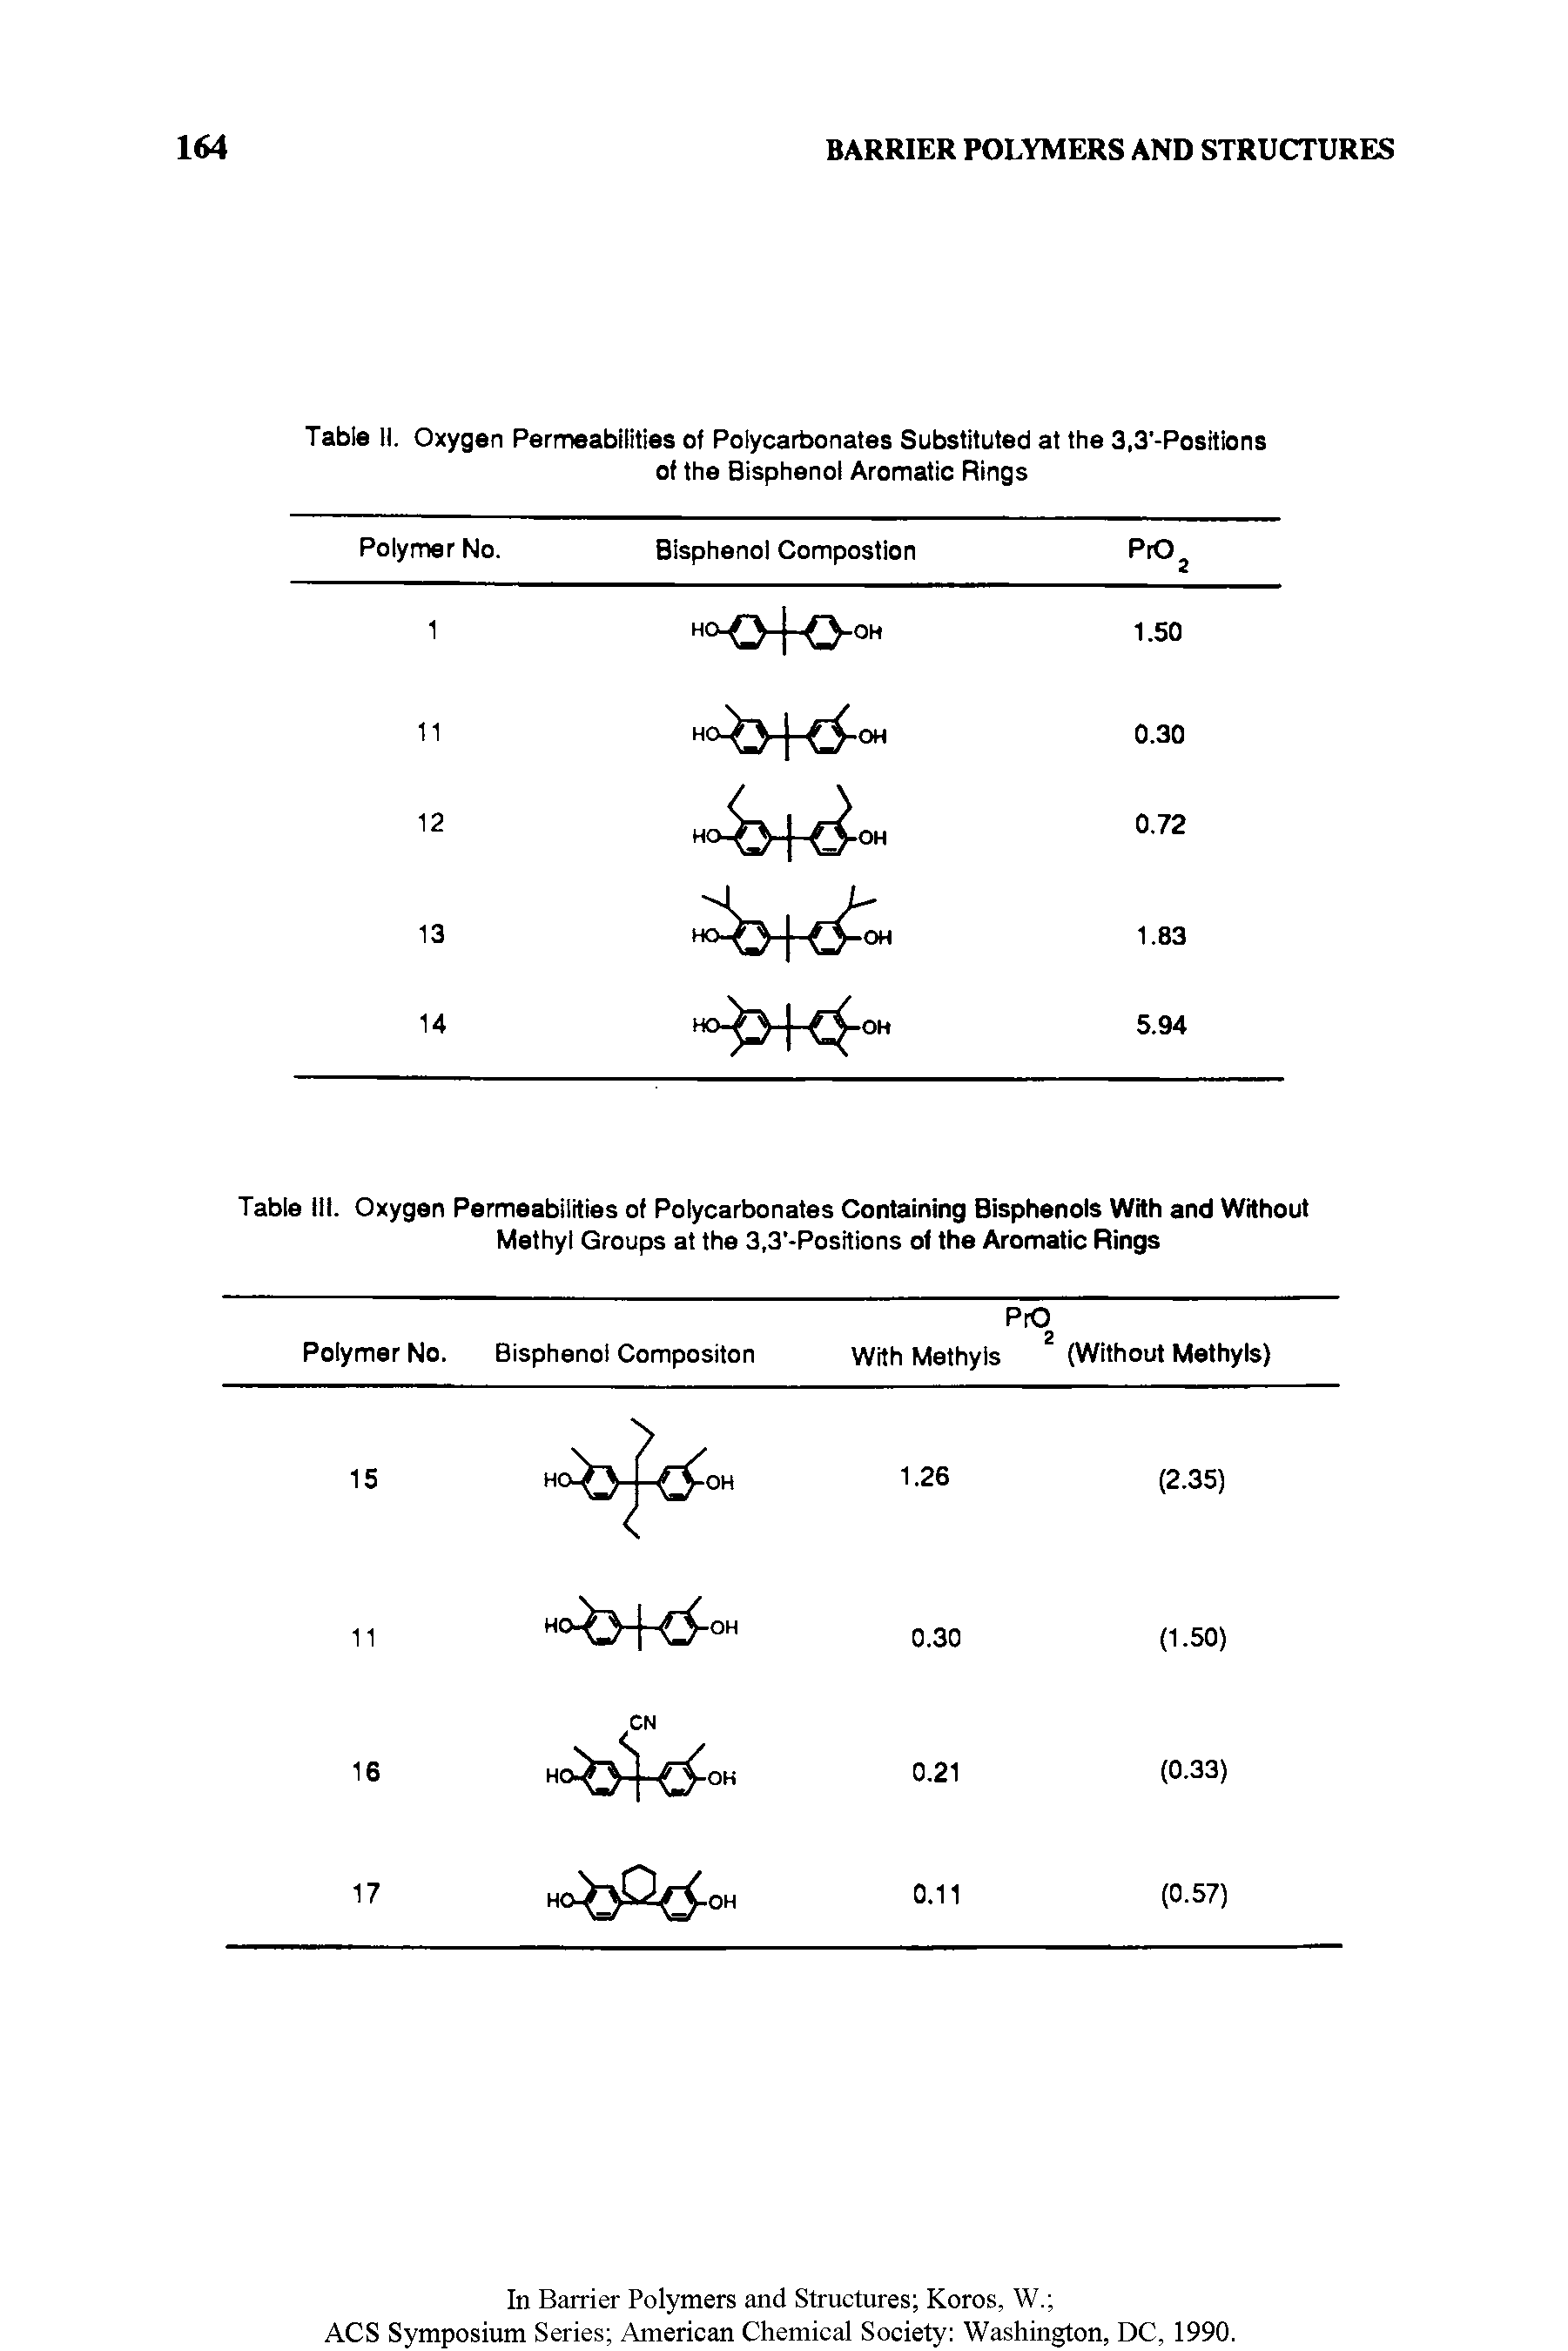 Table III. Oxygen Permeabilities of Polycarbonates Containing Bisphenols With and Without Methyl Groups at the 3,3 -Positions of the Aromatic Rings...